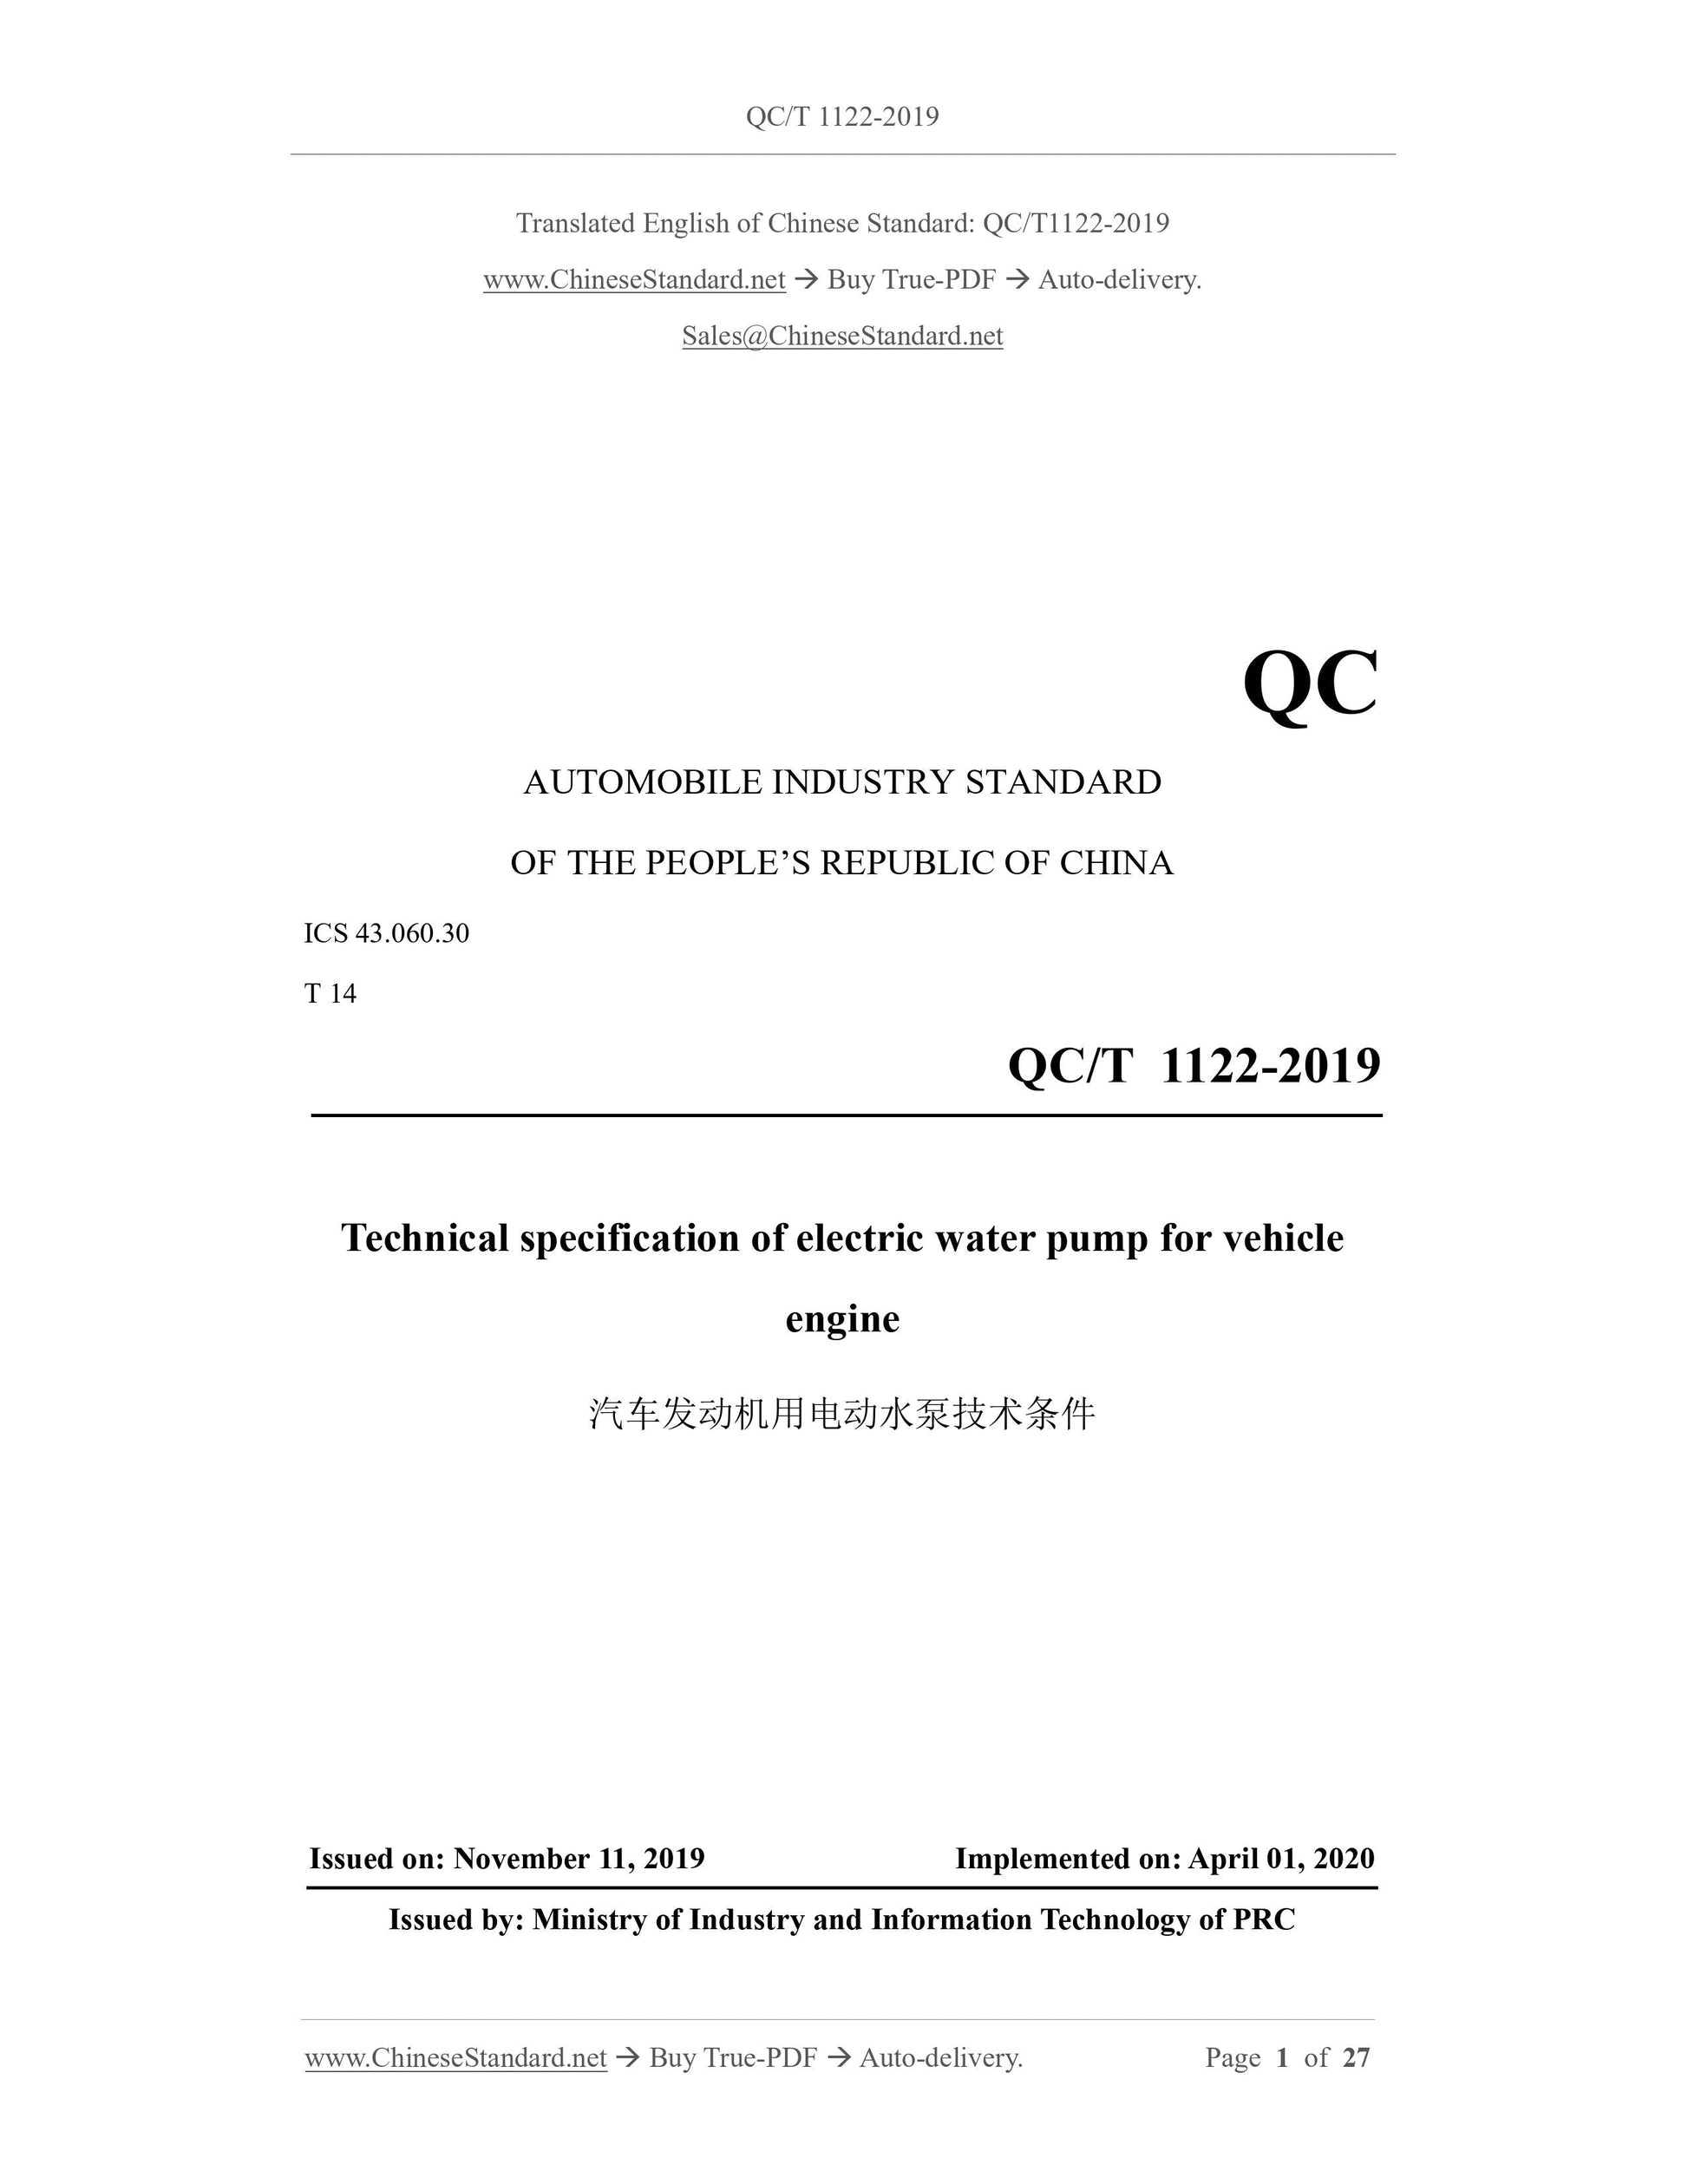 QC/T 1122-2019 Page 1